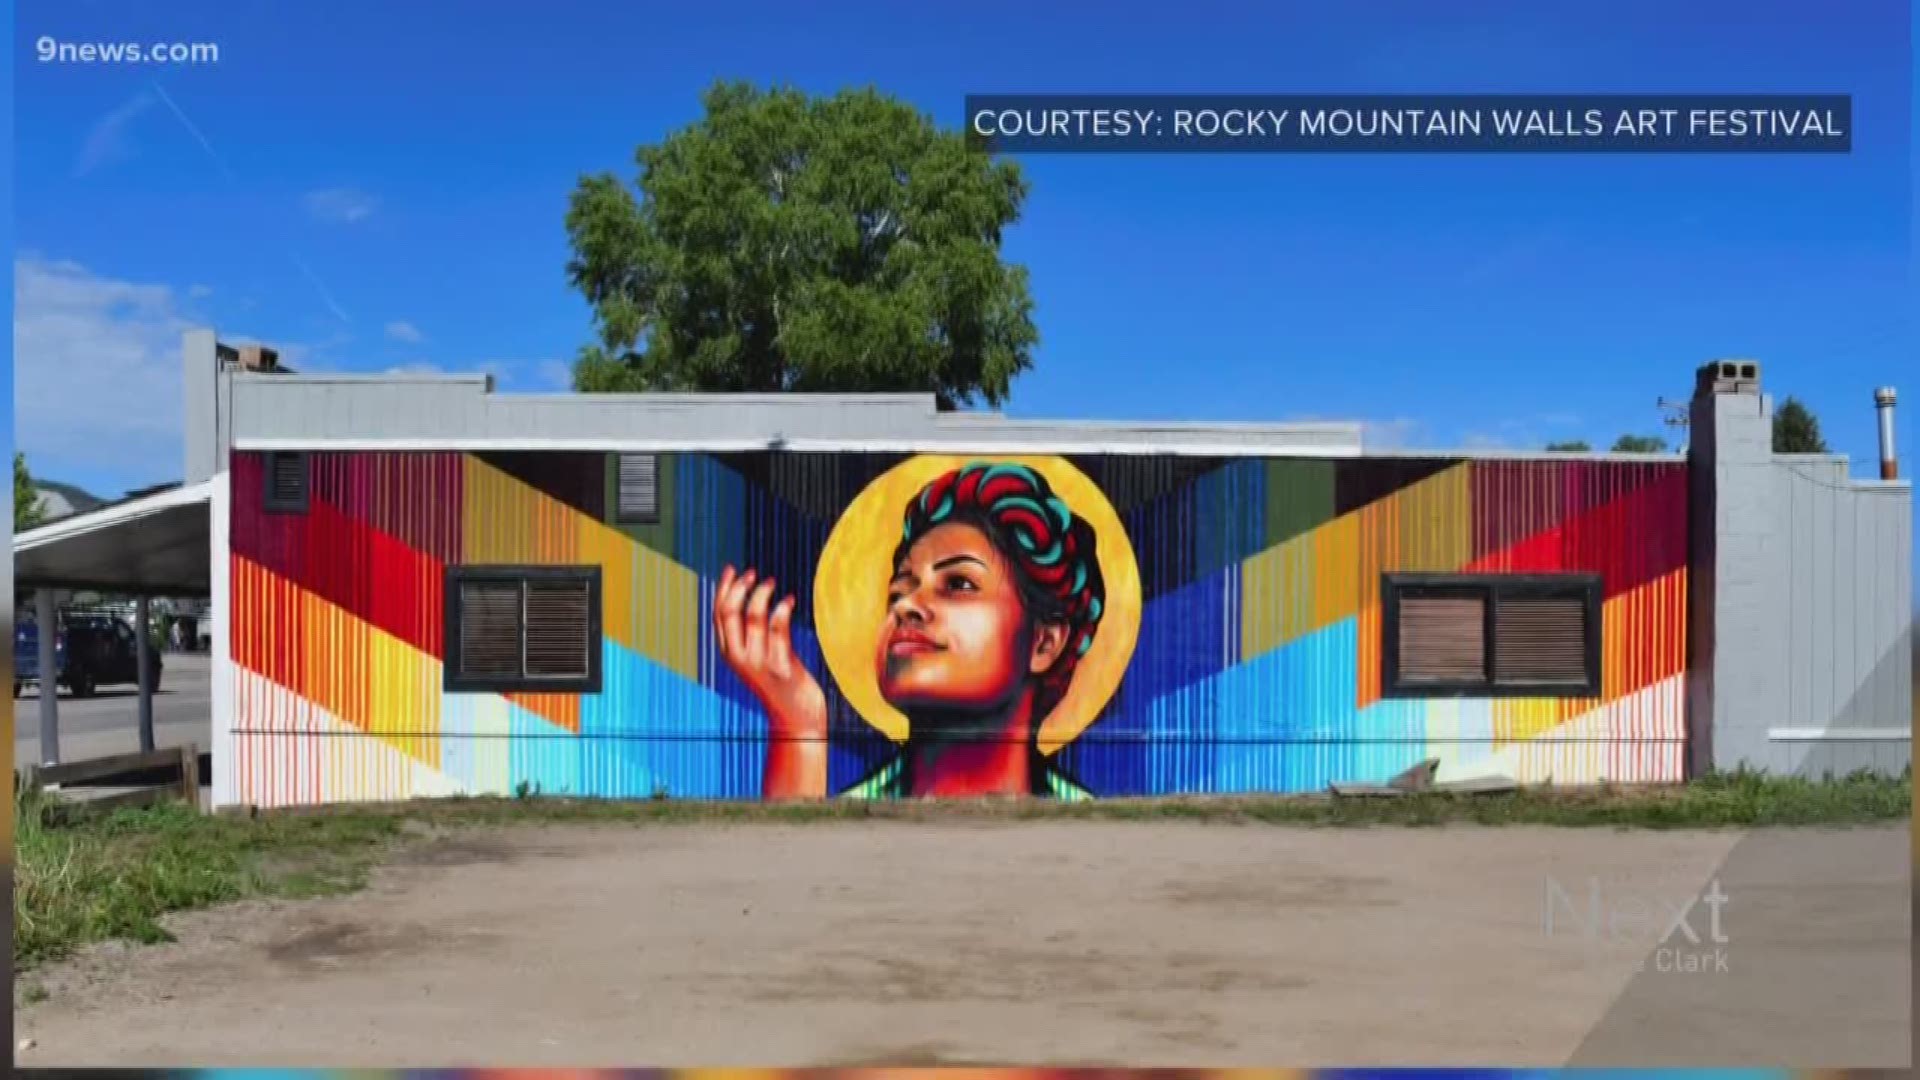 Murals were painted on eight different buildings in Grandby for the Rocky Mountain Walls Art Festival. Business owners told Next they were concerned officials were going to force them to paint over them because of complaints.